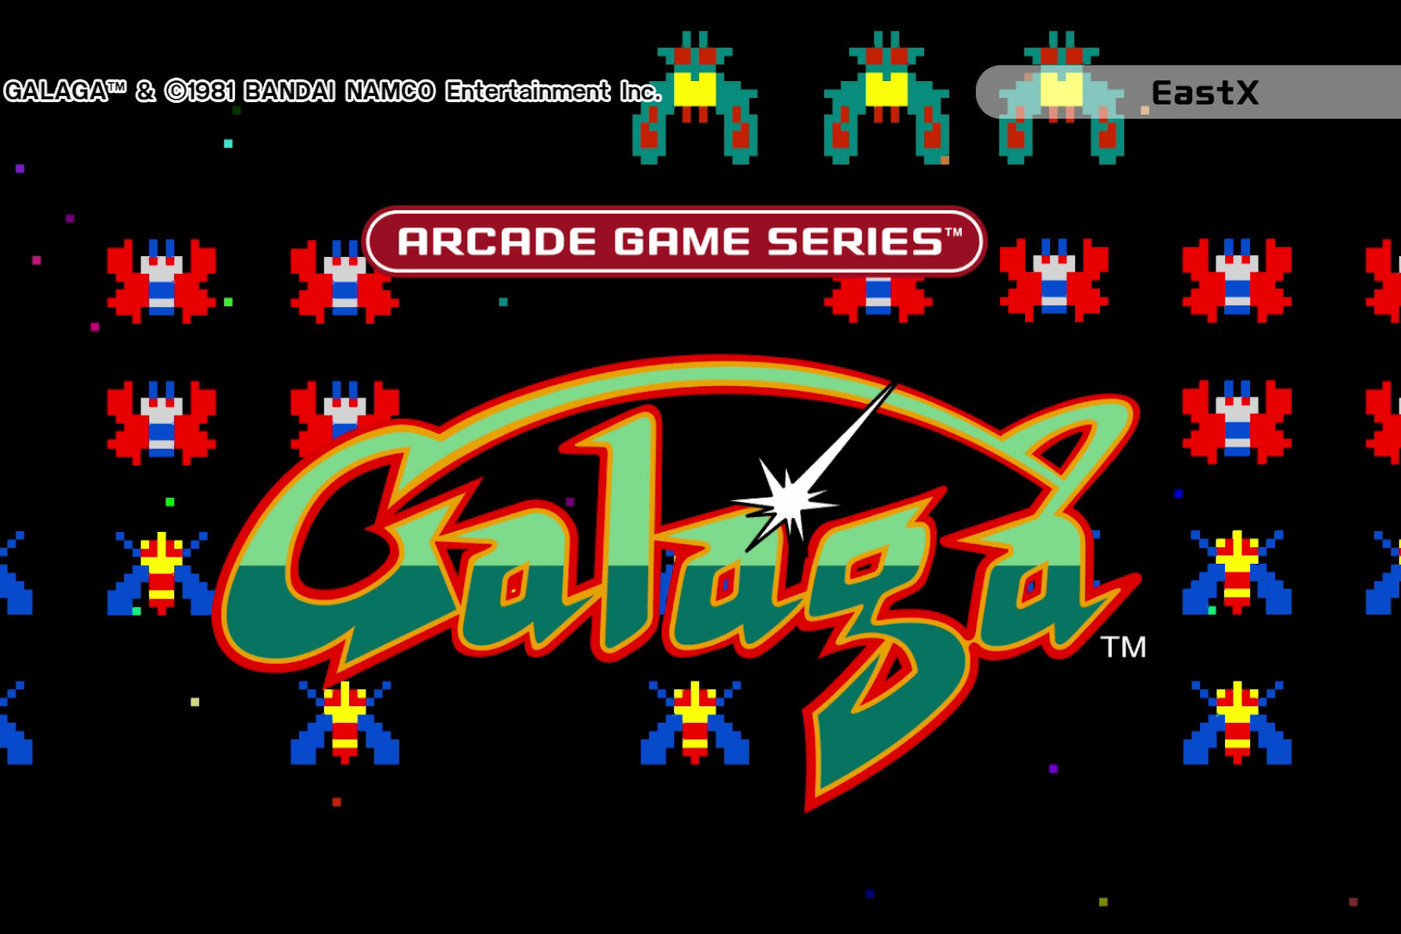 21%20My%20Arcade%20Official%20-%20New%20Collection%20-%20Miny%20Player%20Galaga.jpg